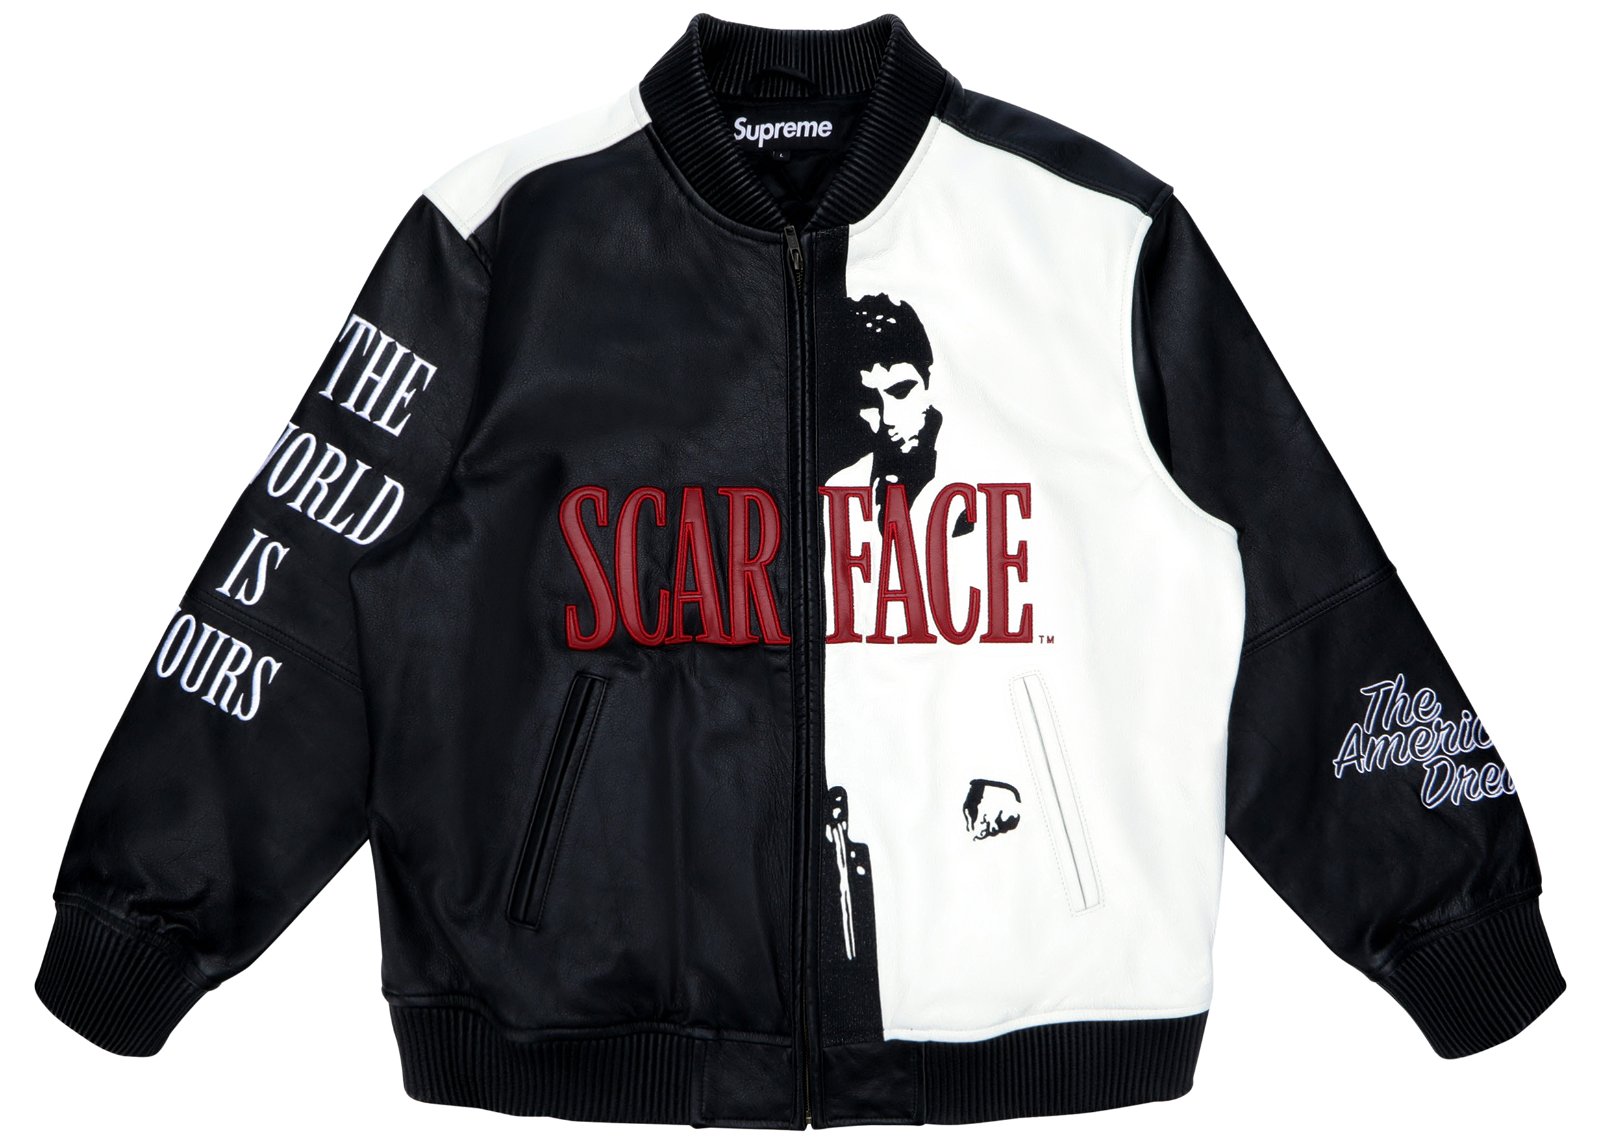 Supreme Scarface Embroidered Leather Jacket Black sneaker informations